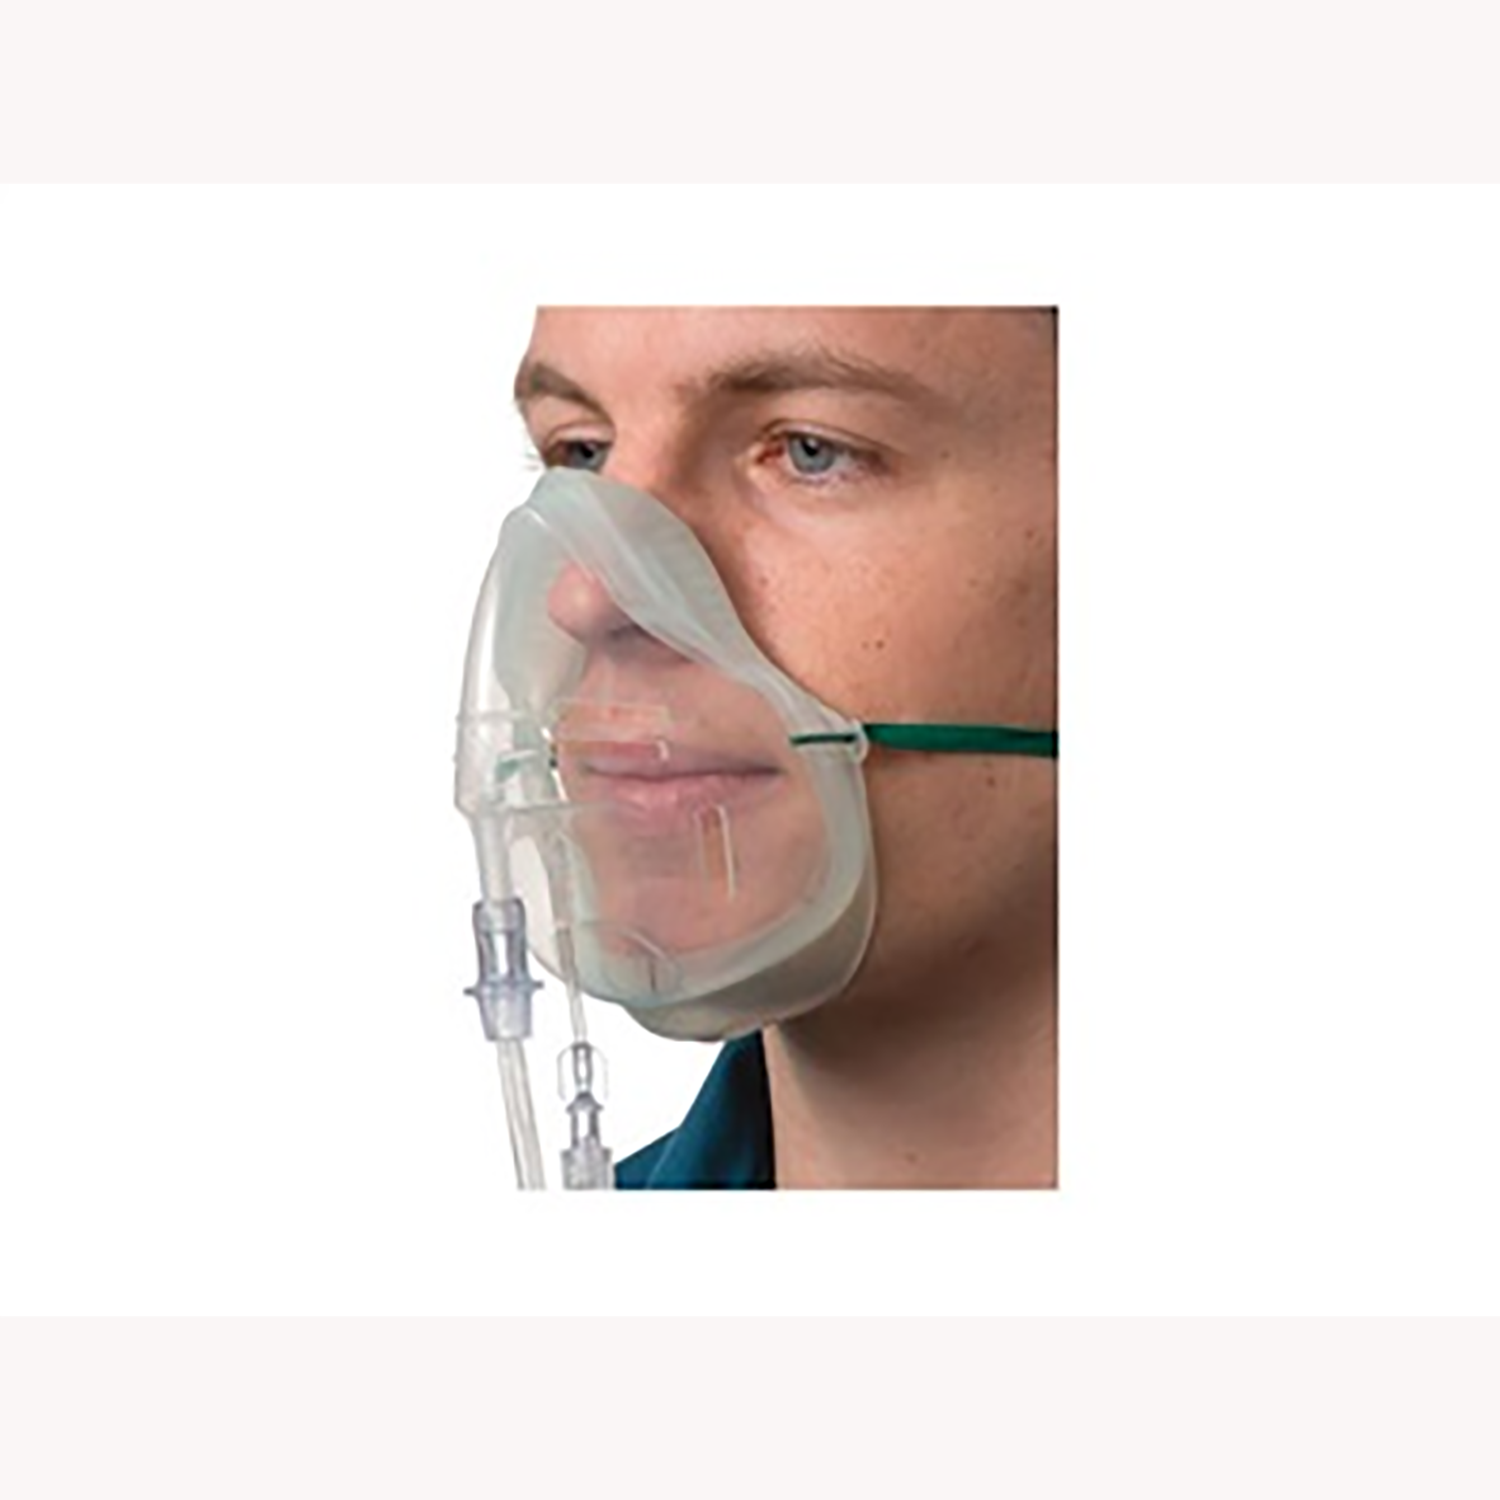 ETCO2 Concentration Mask | Adult | CO2 Monitoring Line and Tube | 2.1m | Pack of 30